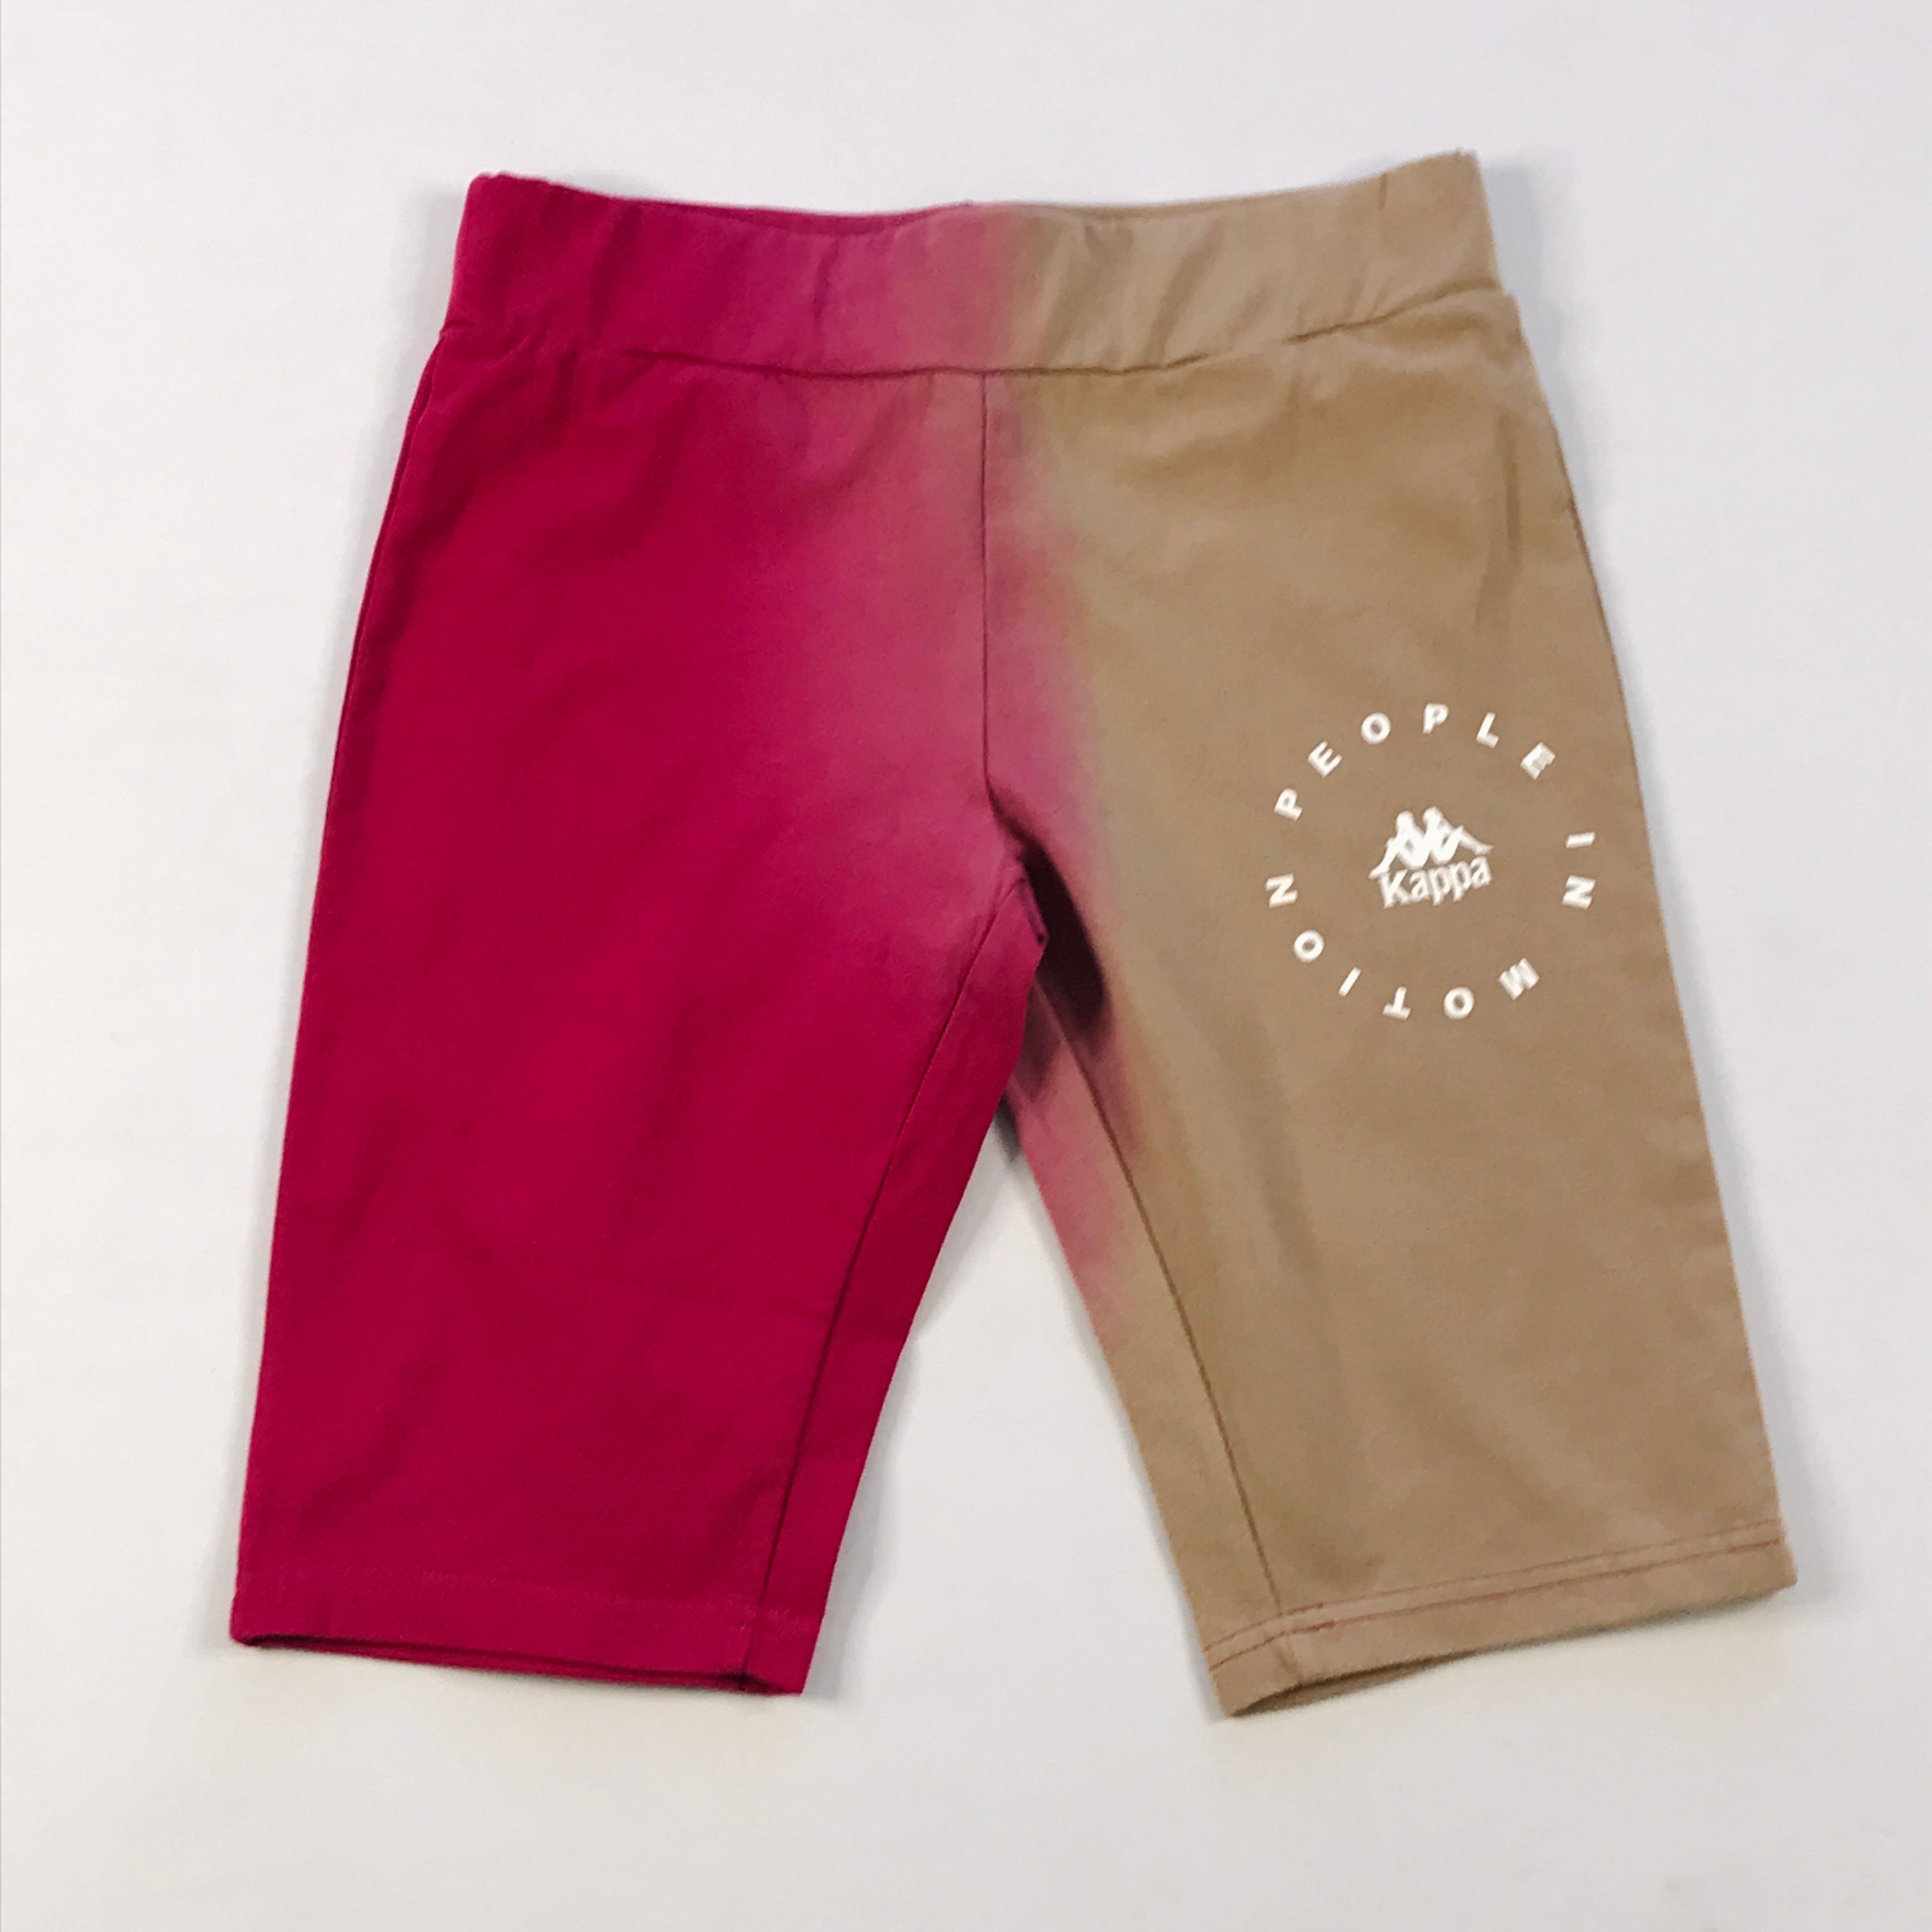 Kappa Authentic sulawesi biker shorts in brown-red-white